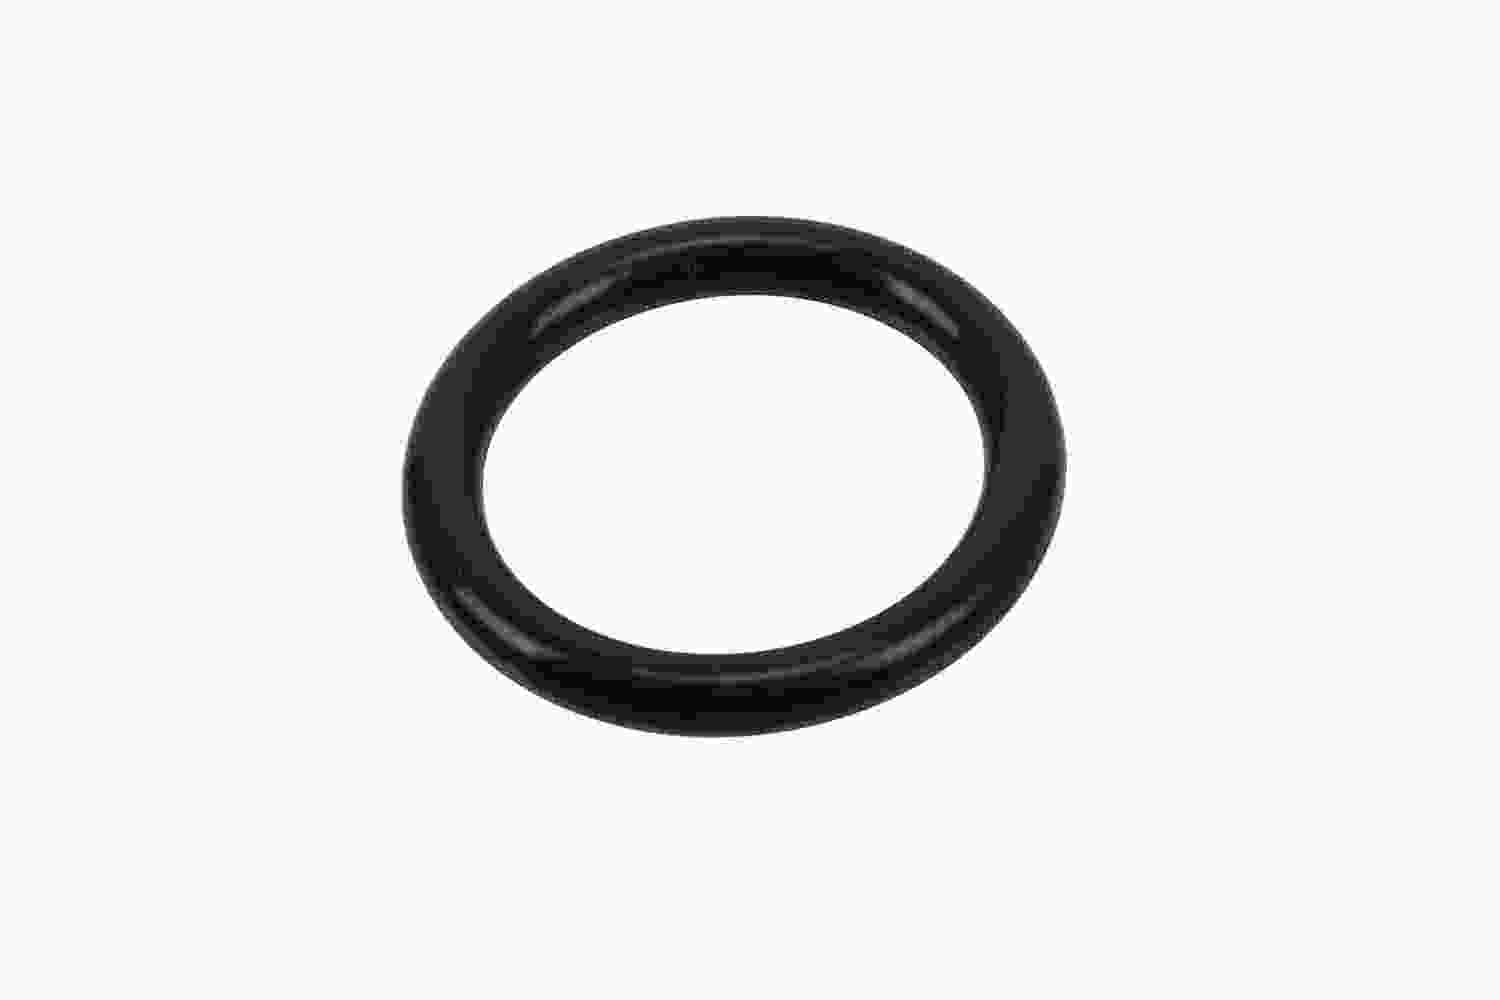 GM GENUINE PARTS - Engine Oil Cooler Seal - GMP 97216175